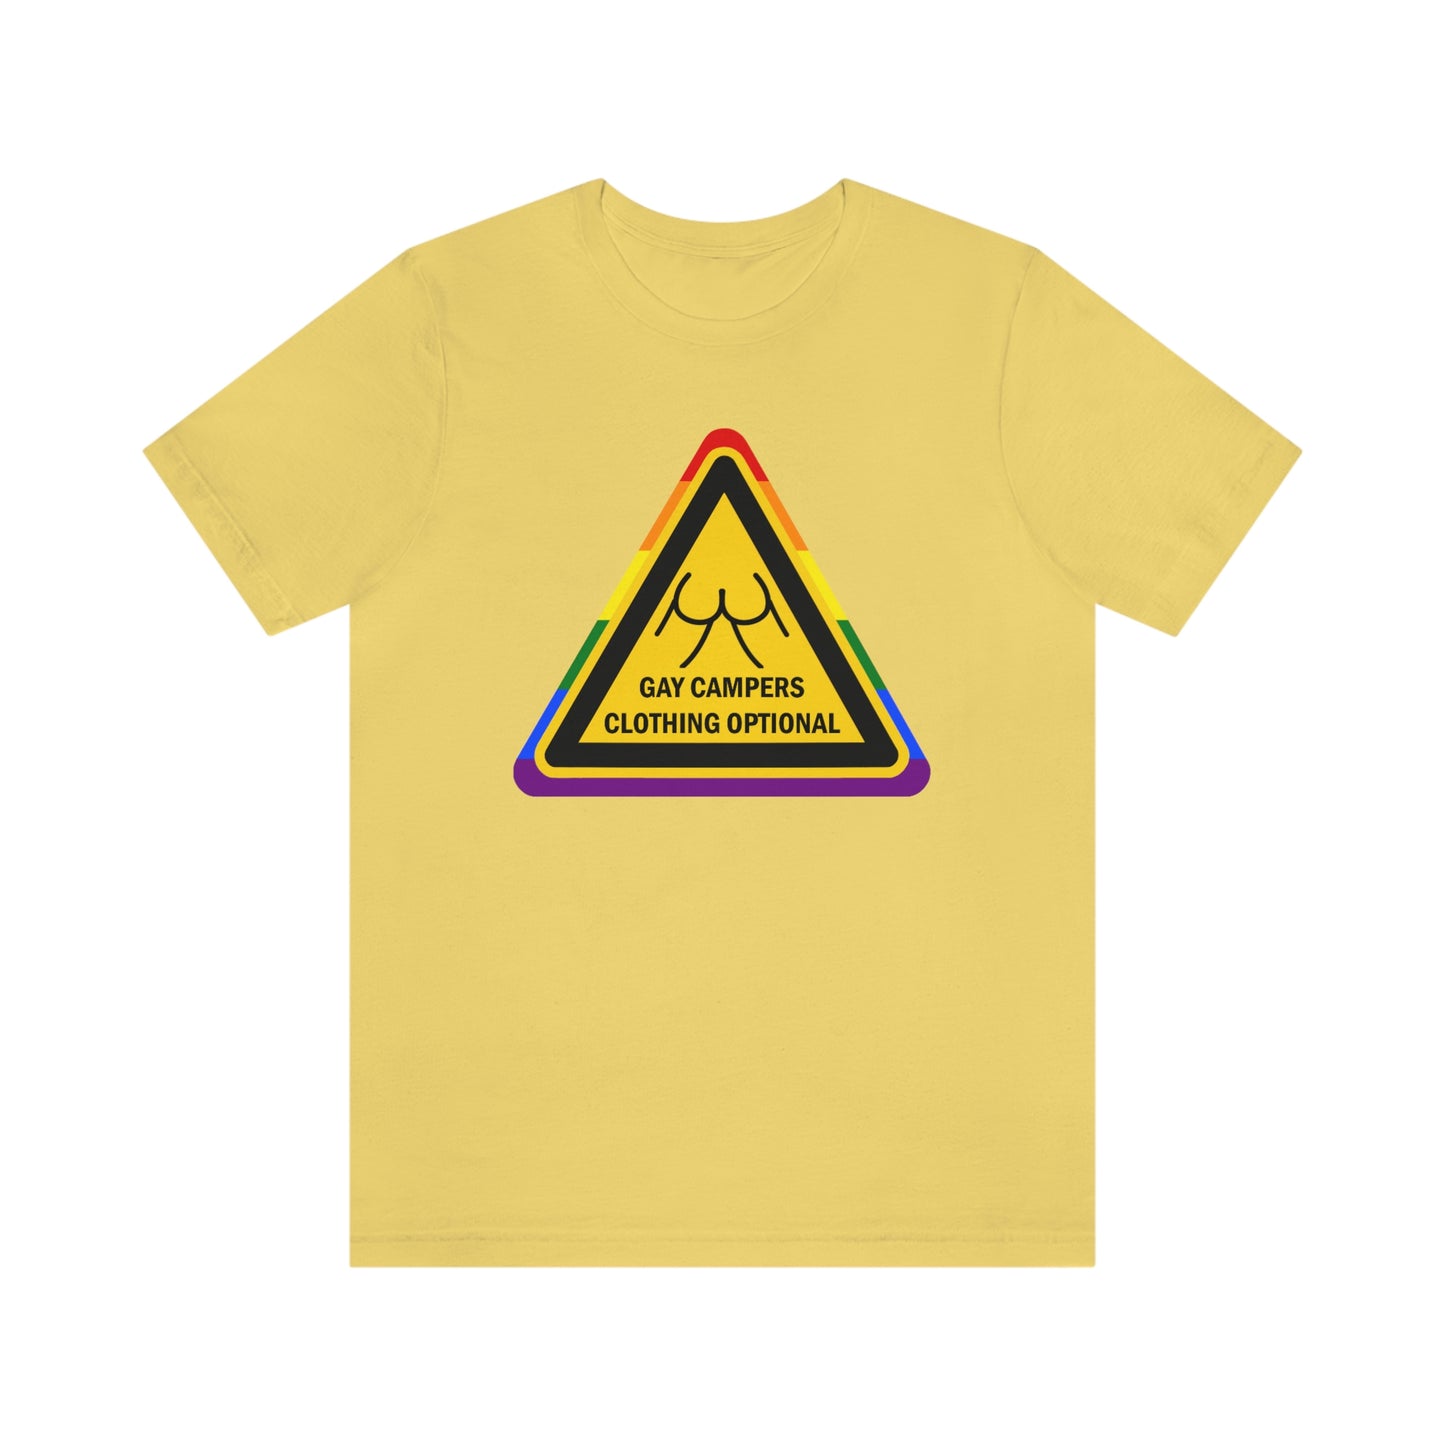 Gay Campers - Clothing Optional Warning Sign Adult Unisex T-Shirt